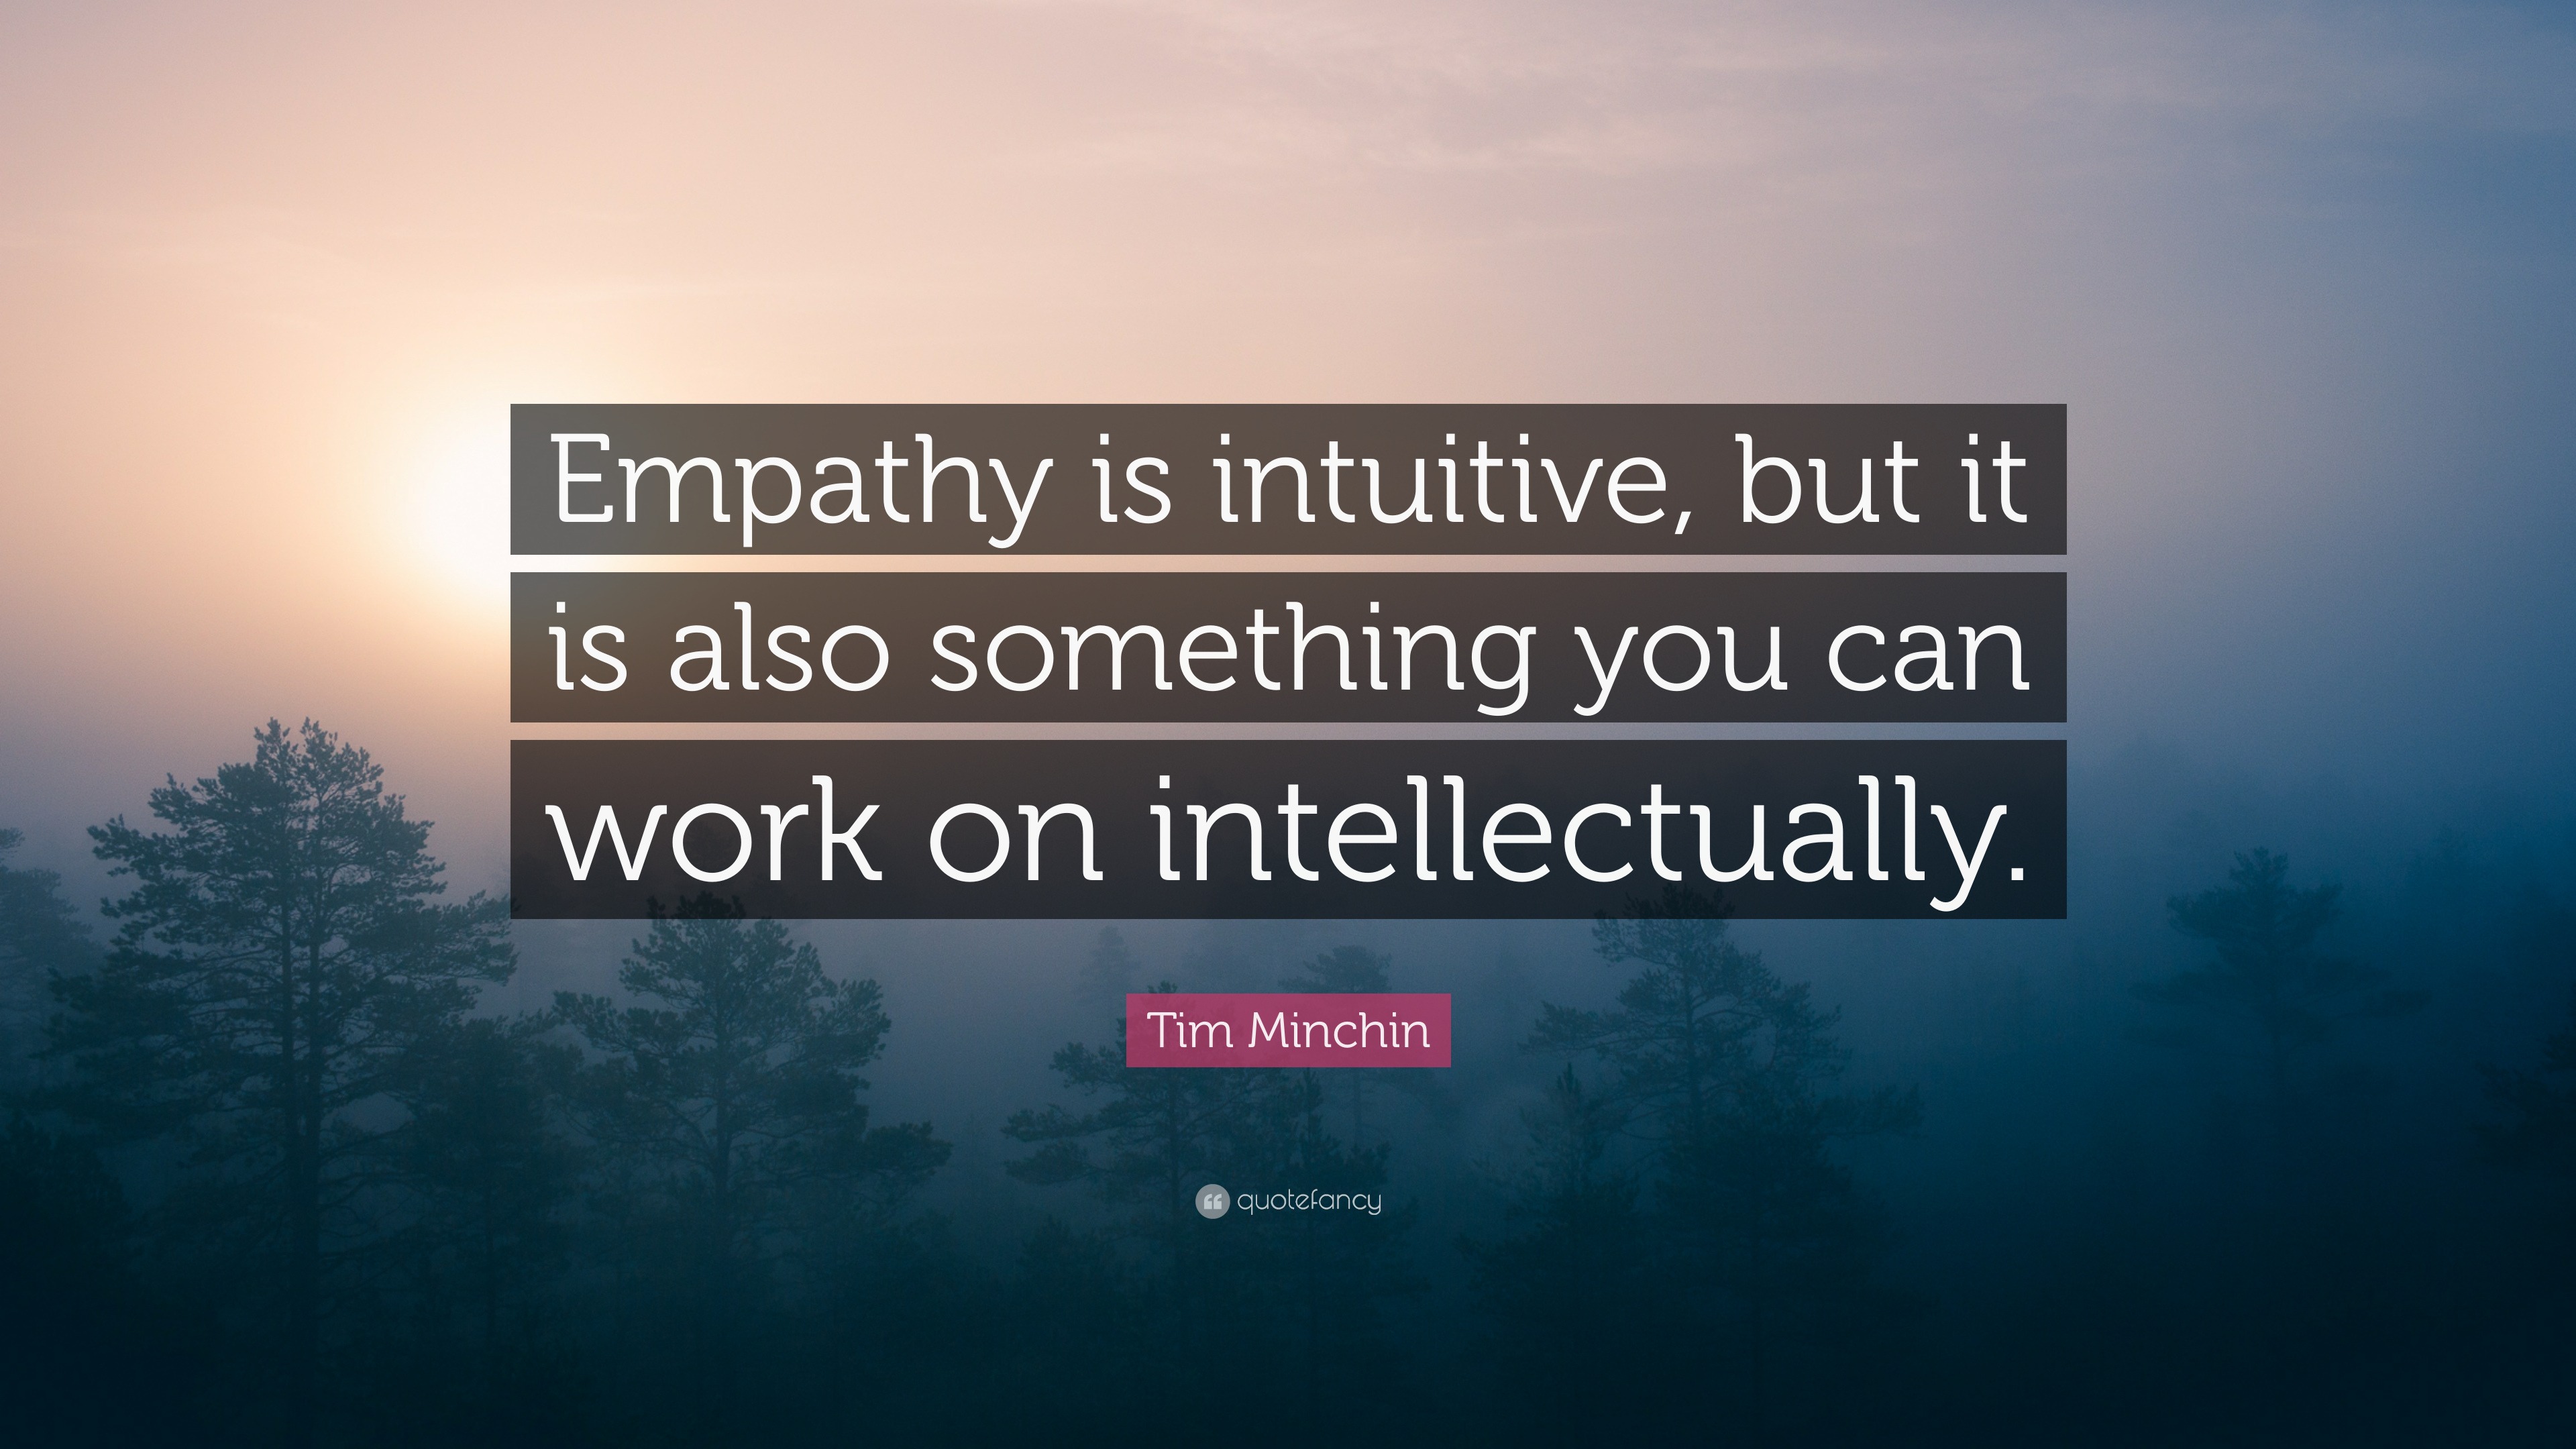 Tim Minchin Quote: “Empathy is intuitive, but it is also something you